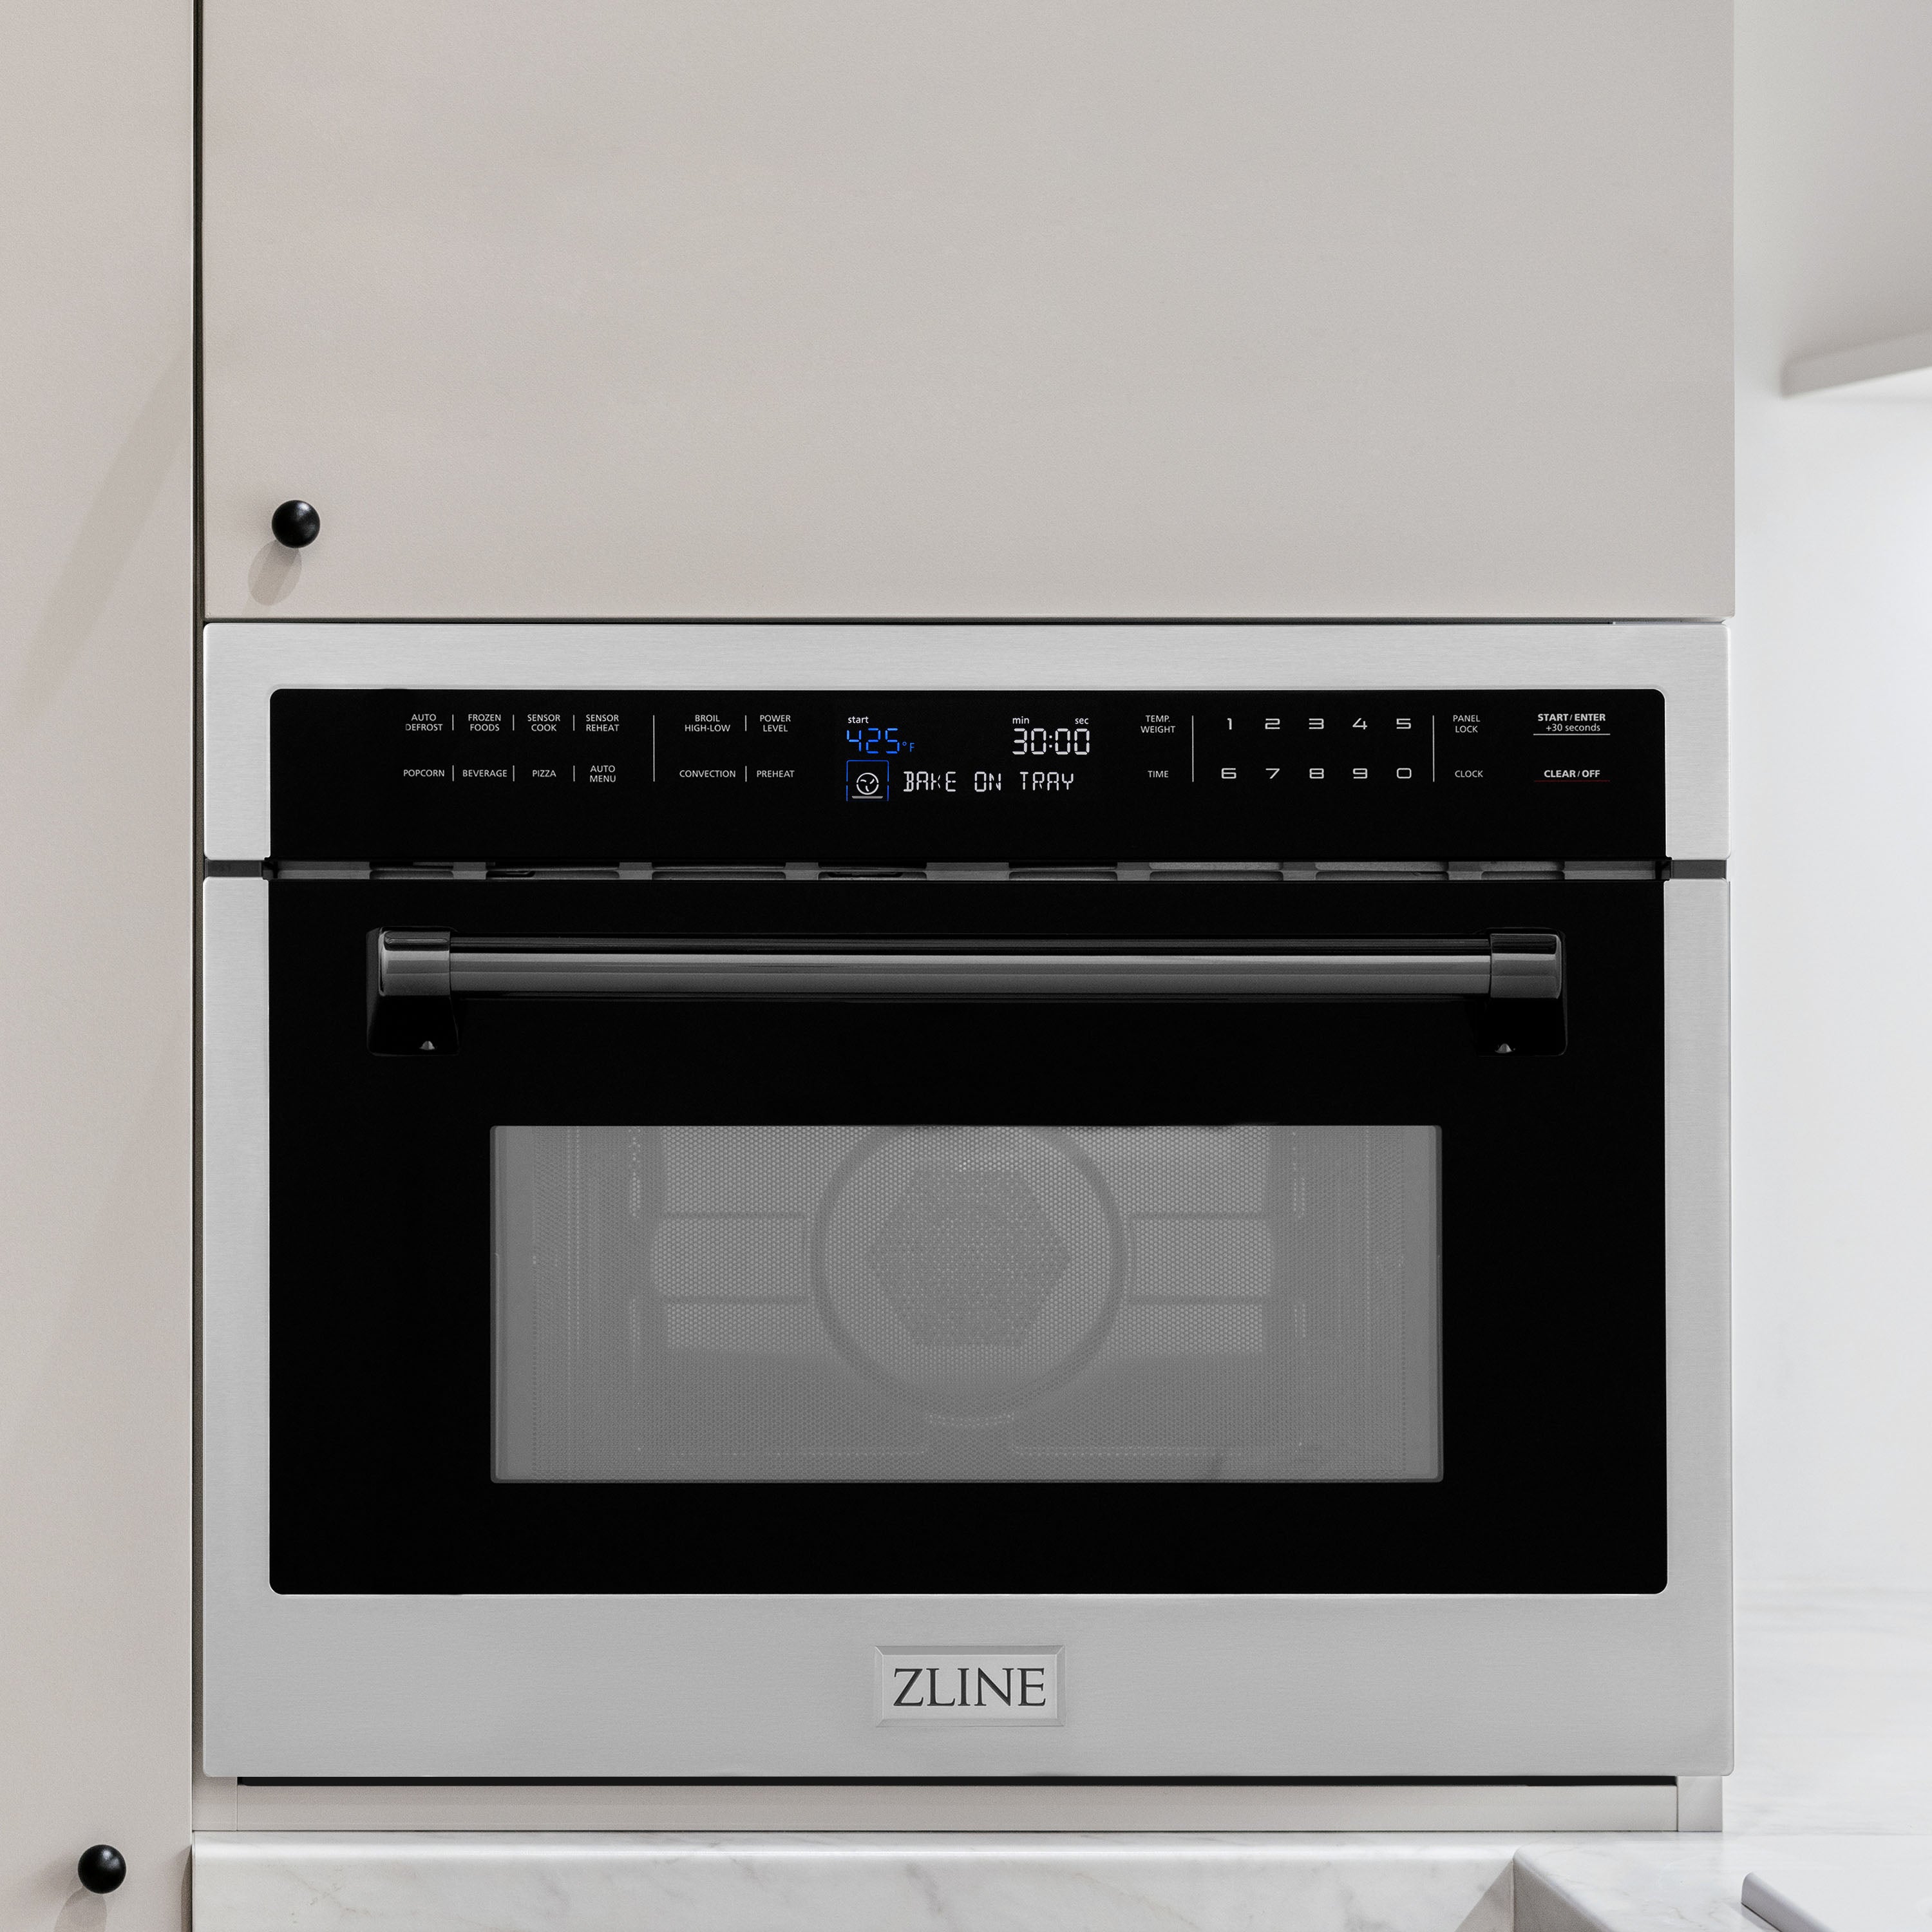 ZLINE Autograph Edition 24 in. 1.6 cu ft. Built-in Convection Microwave Oven in Stainless Steel with Matte Black Accents built-in to white kitchen wall.